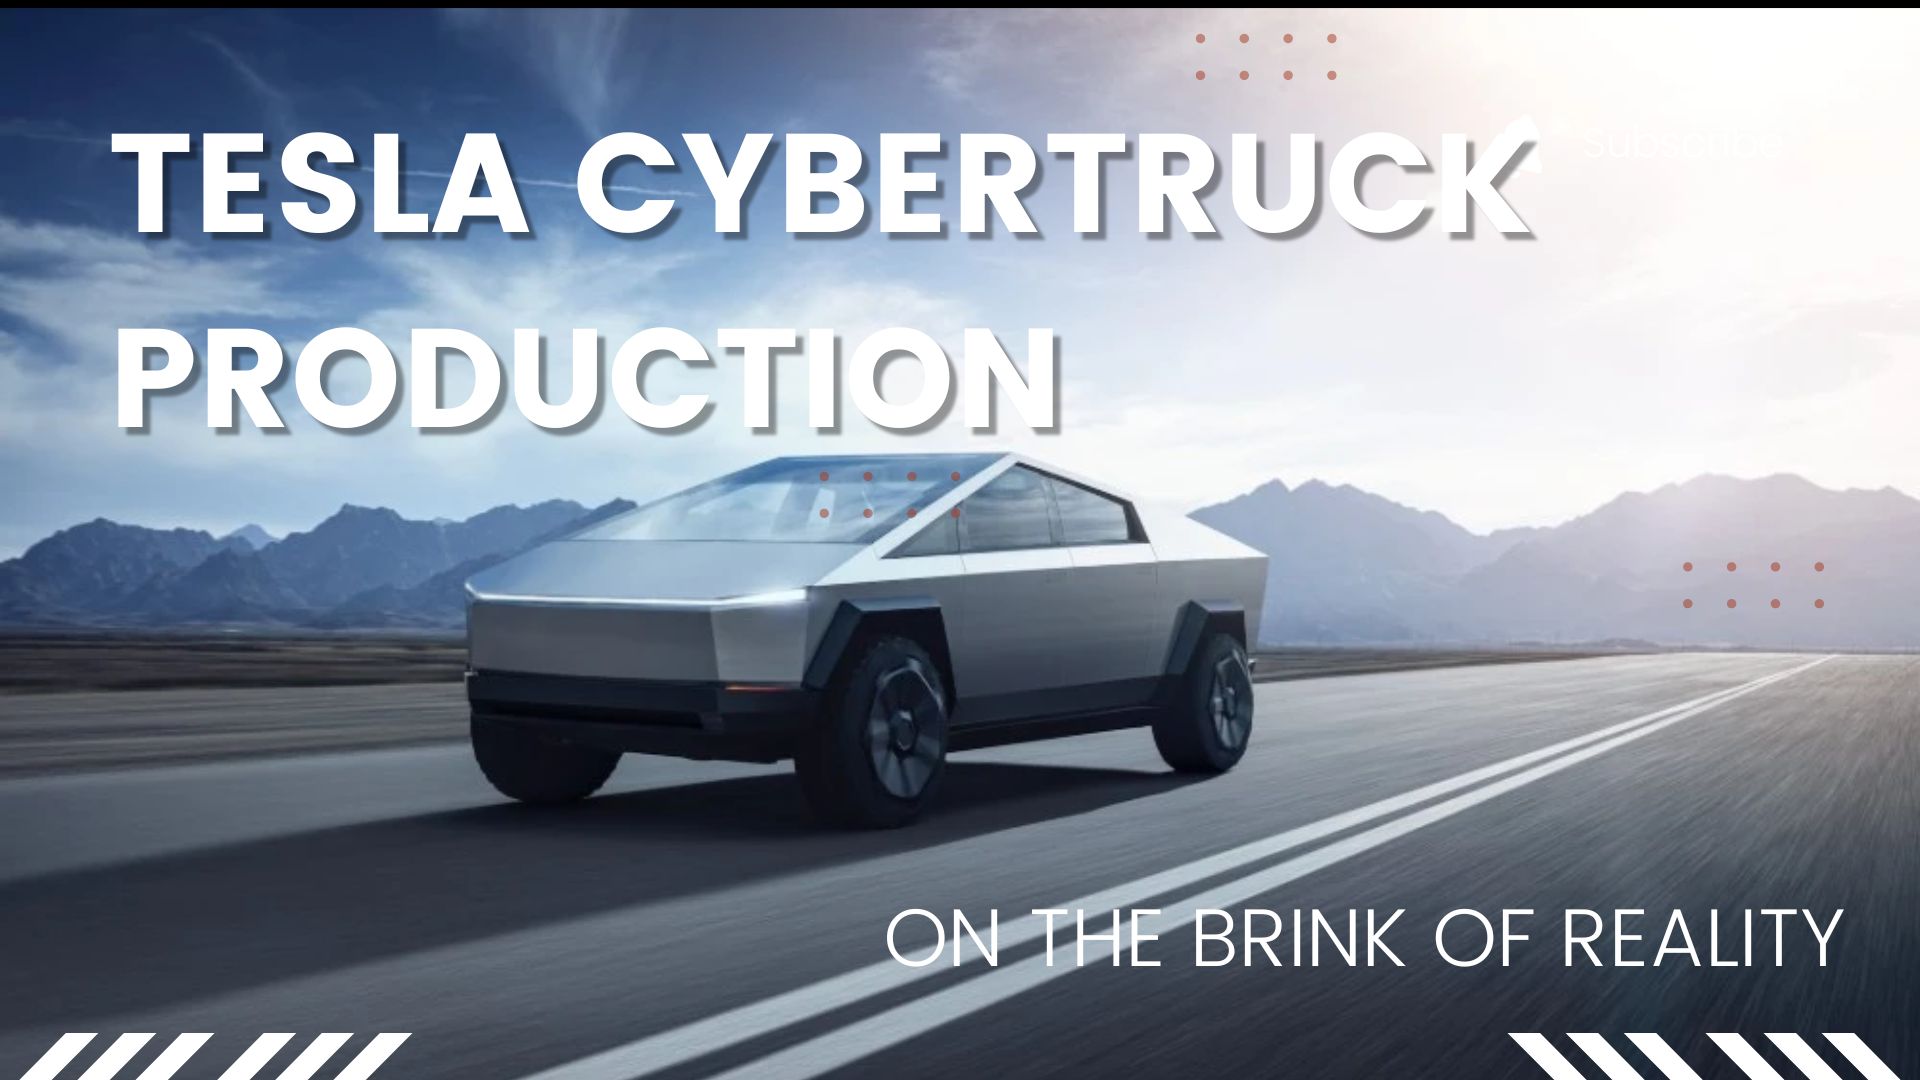 Tesla Cybertruck Production: On the Brink of Reality